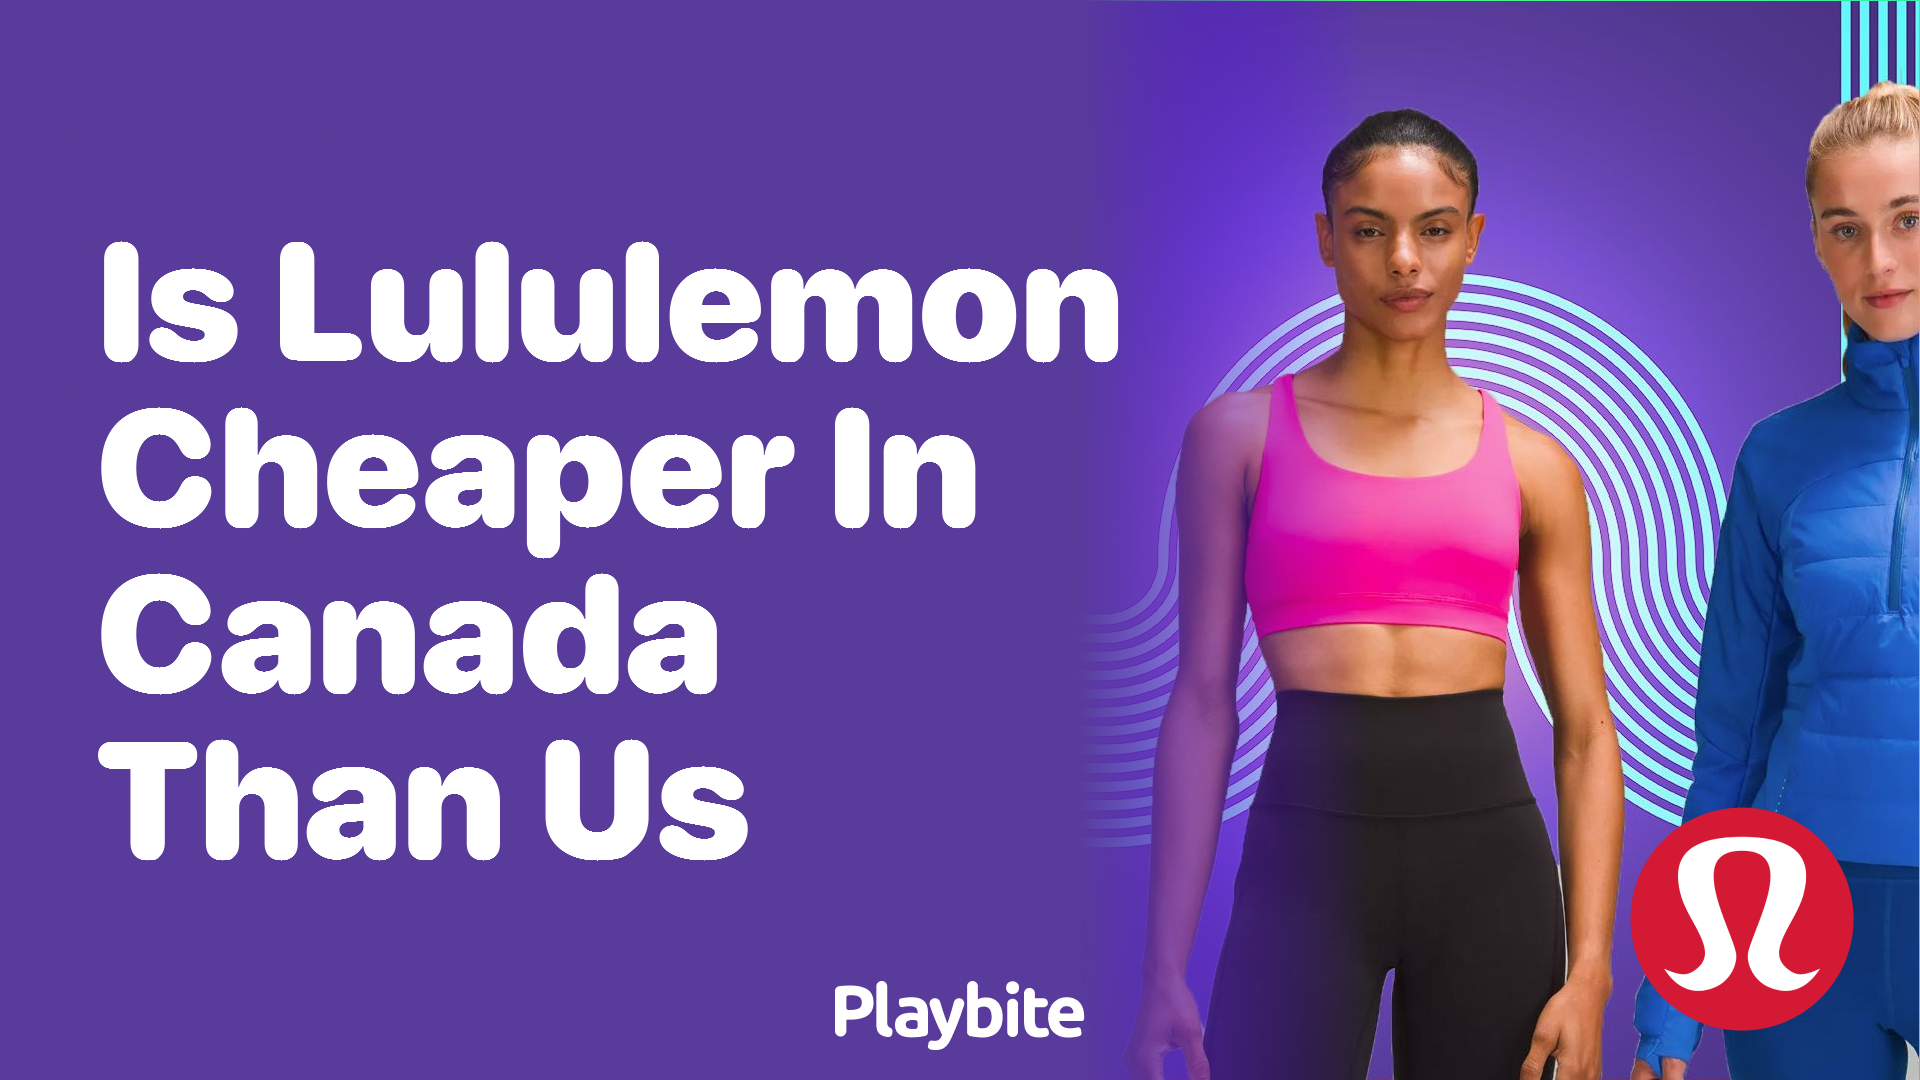 Is Lululemon Cheaper in Canada Than in the US? - Playbite